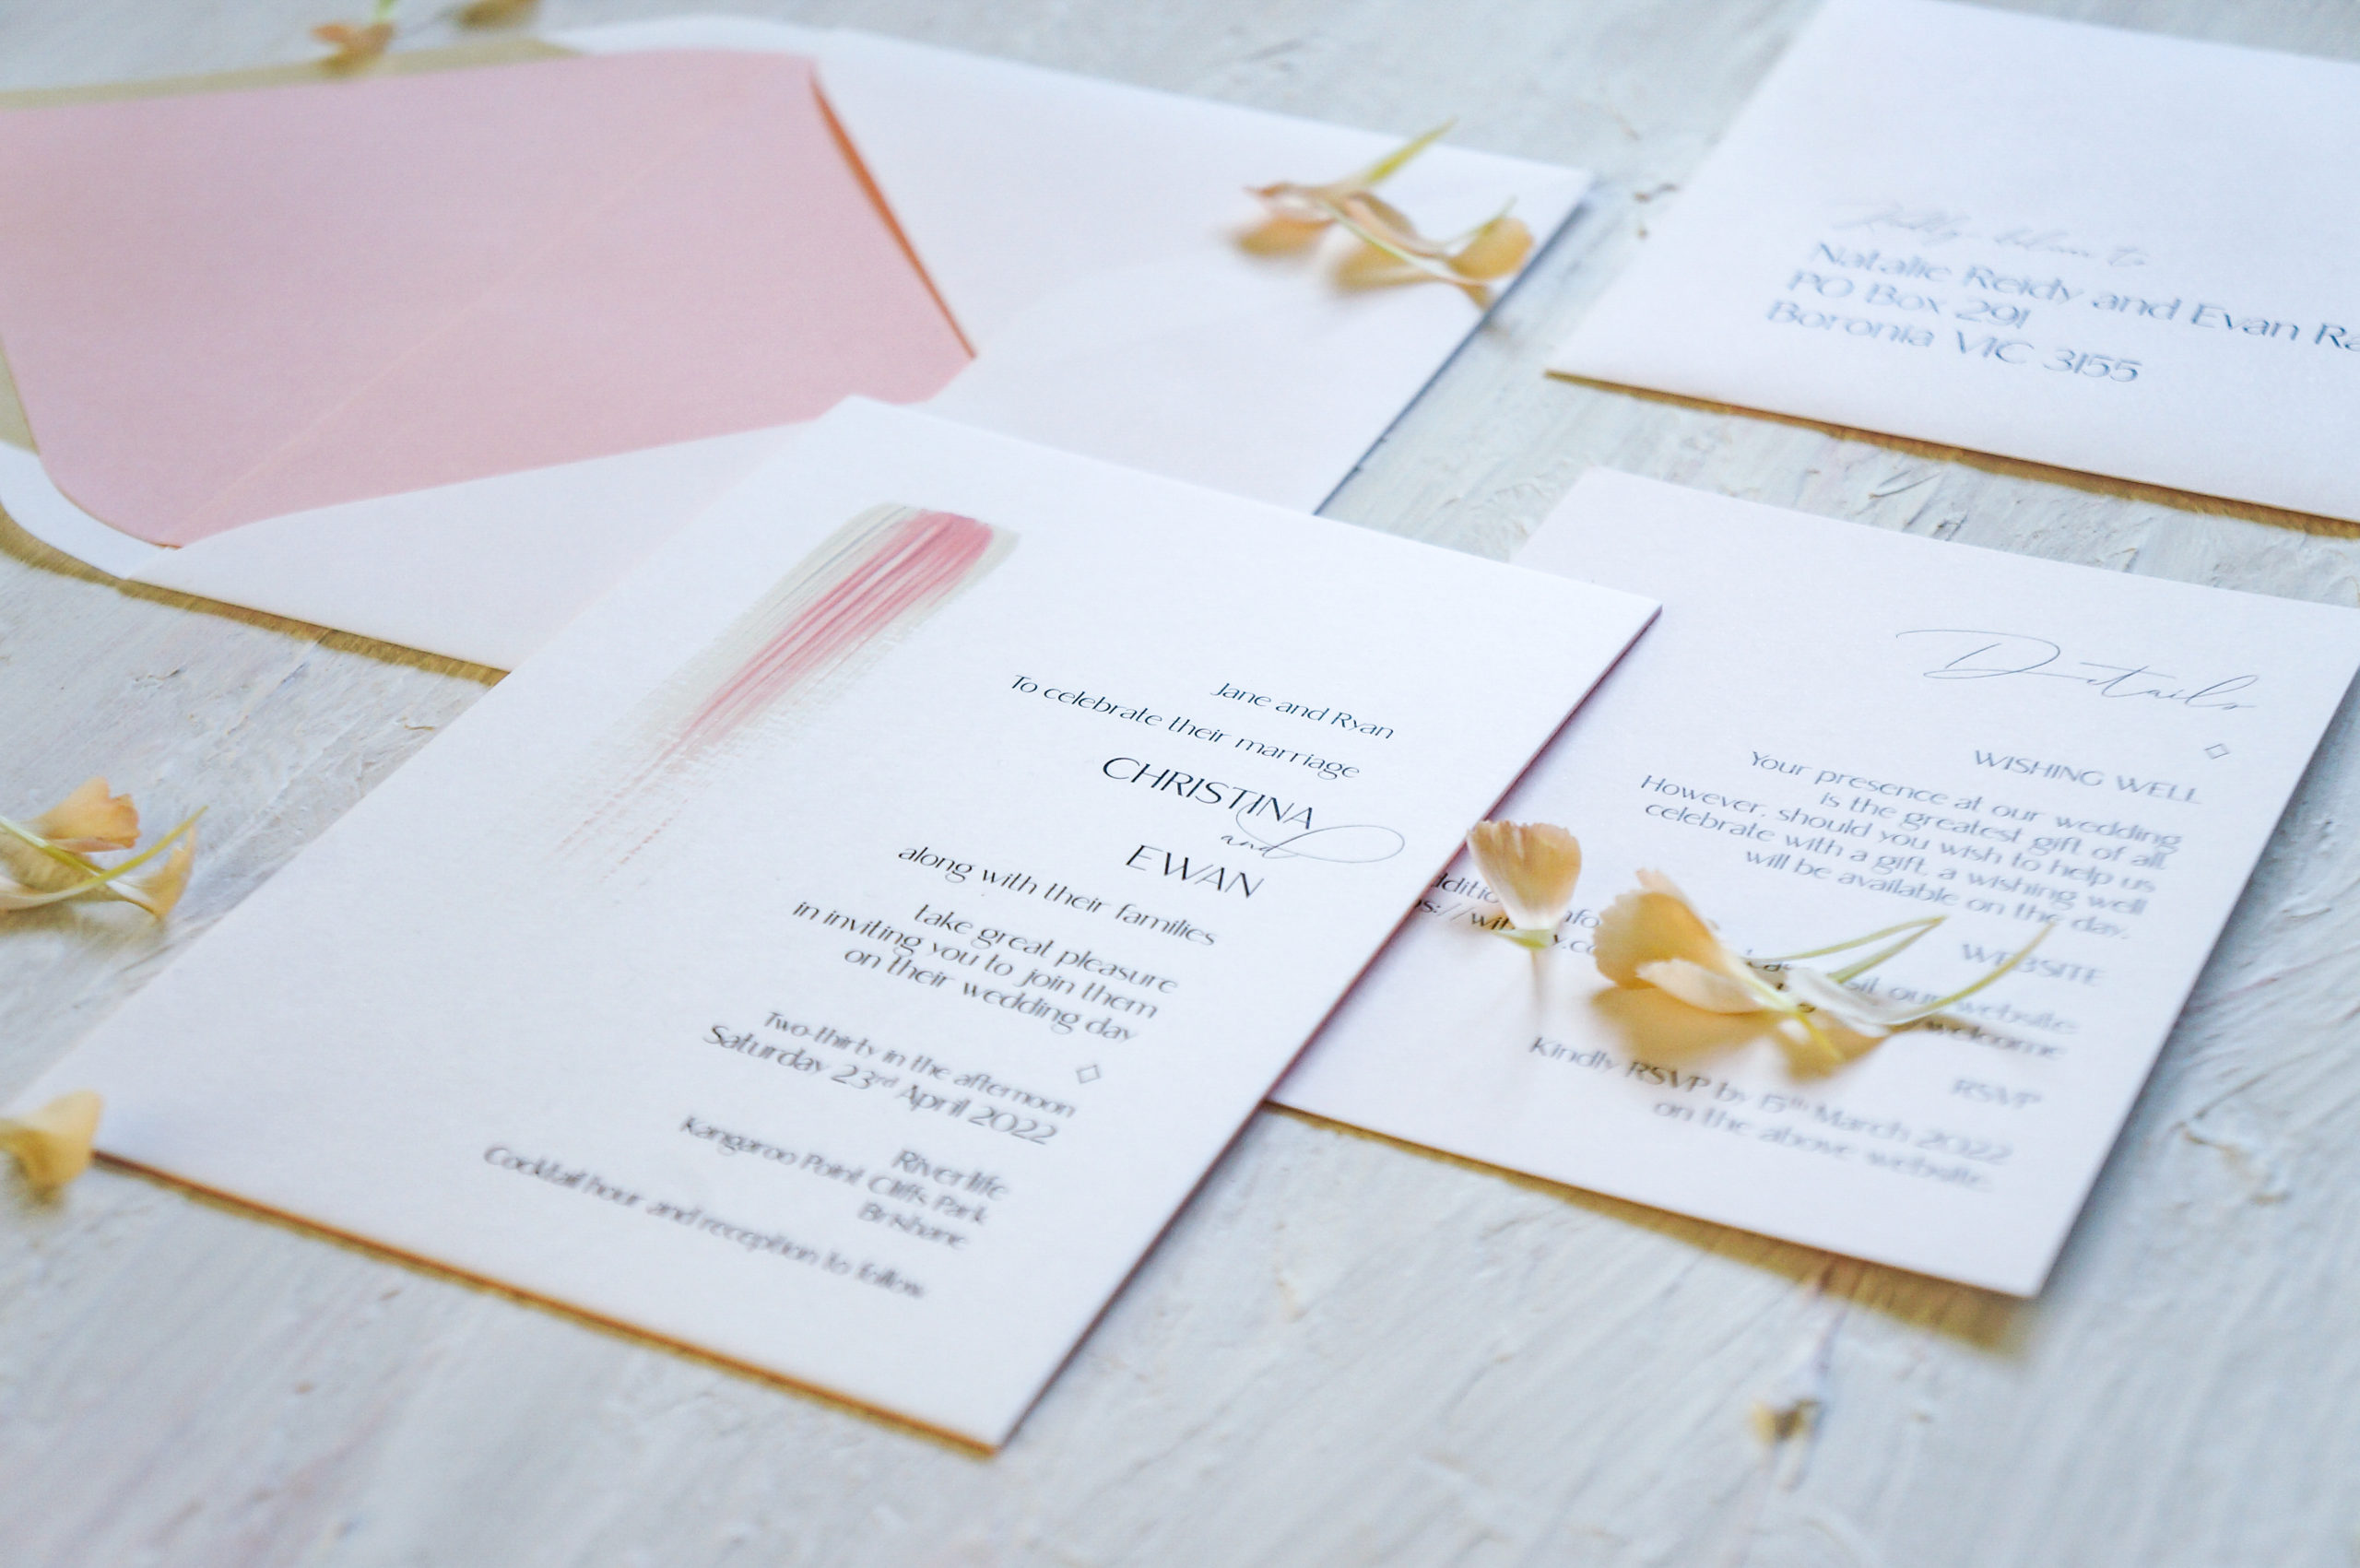 Full hand-painted wedding invitations suite with pink paint and envelope